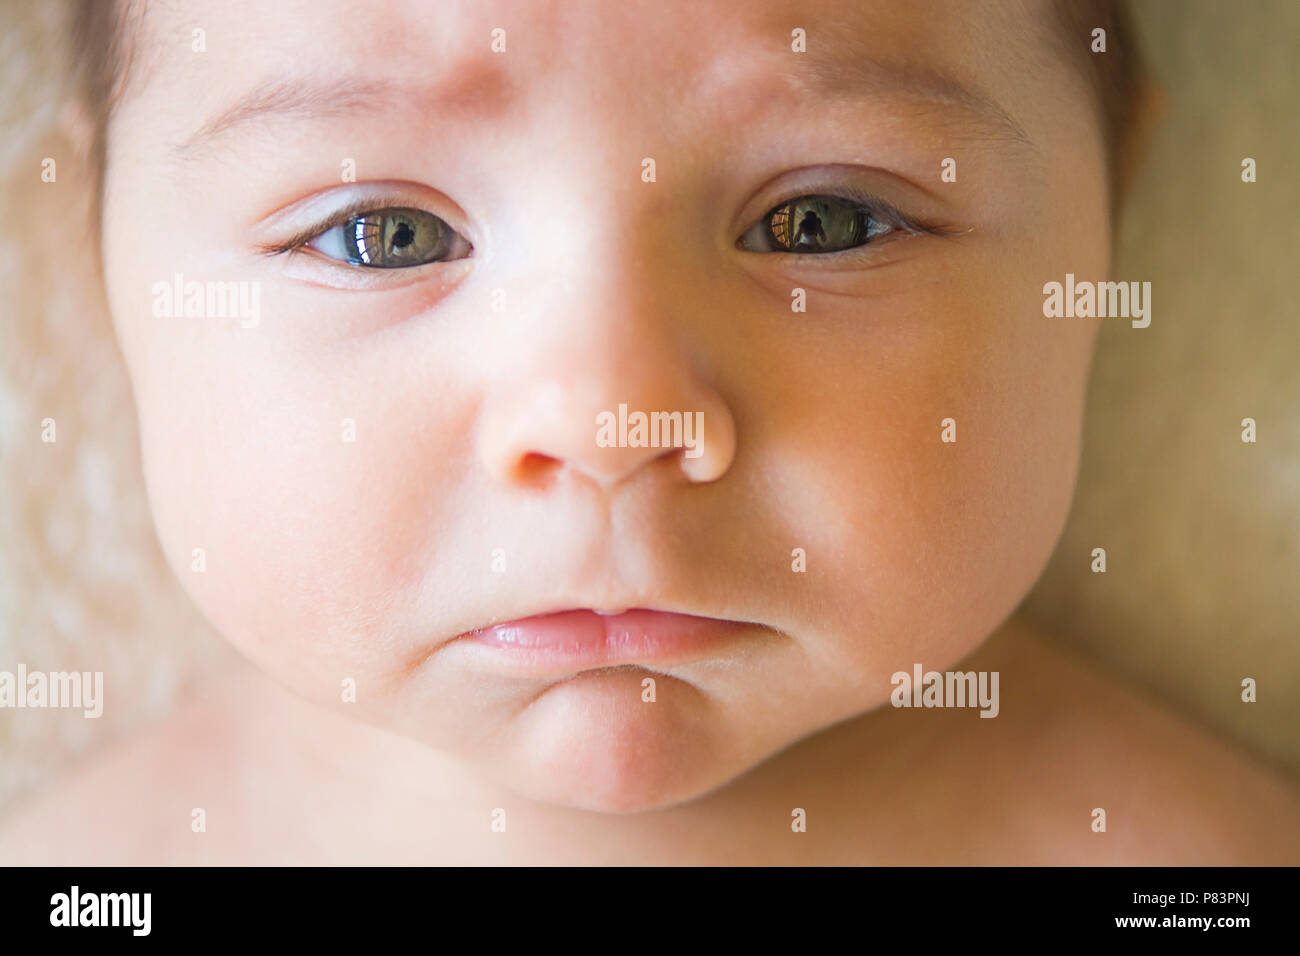 1 month old baby with sad face Stock Photo